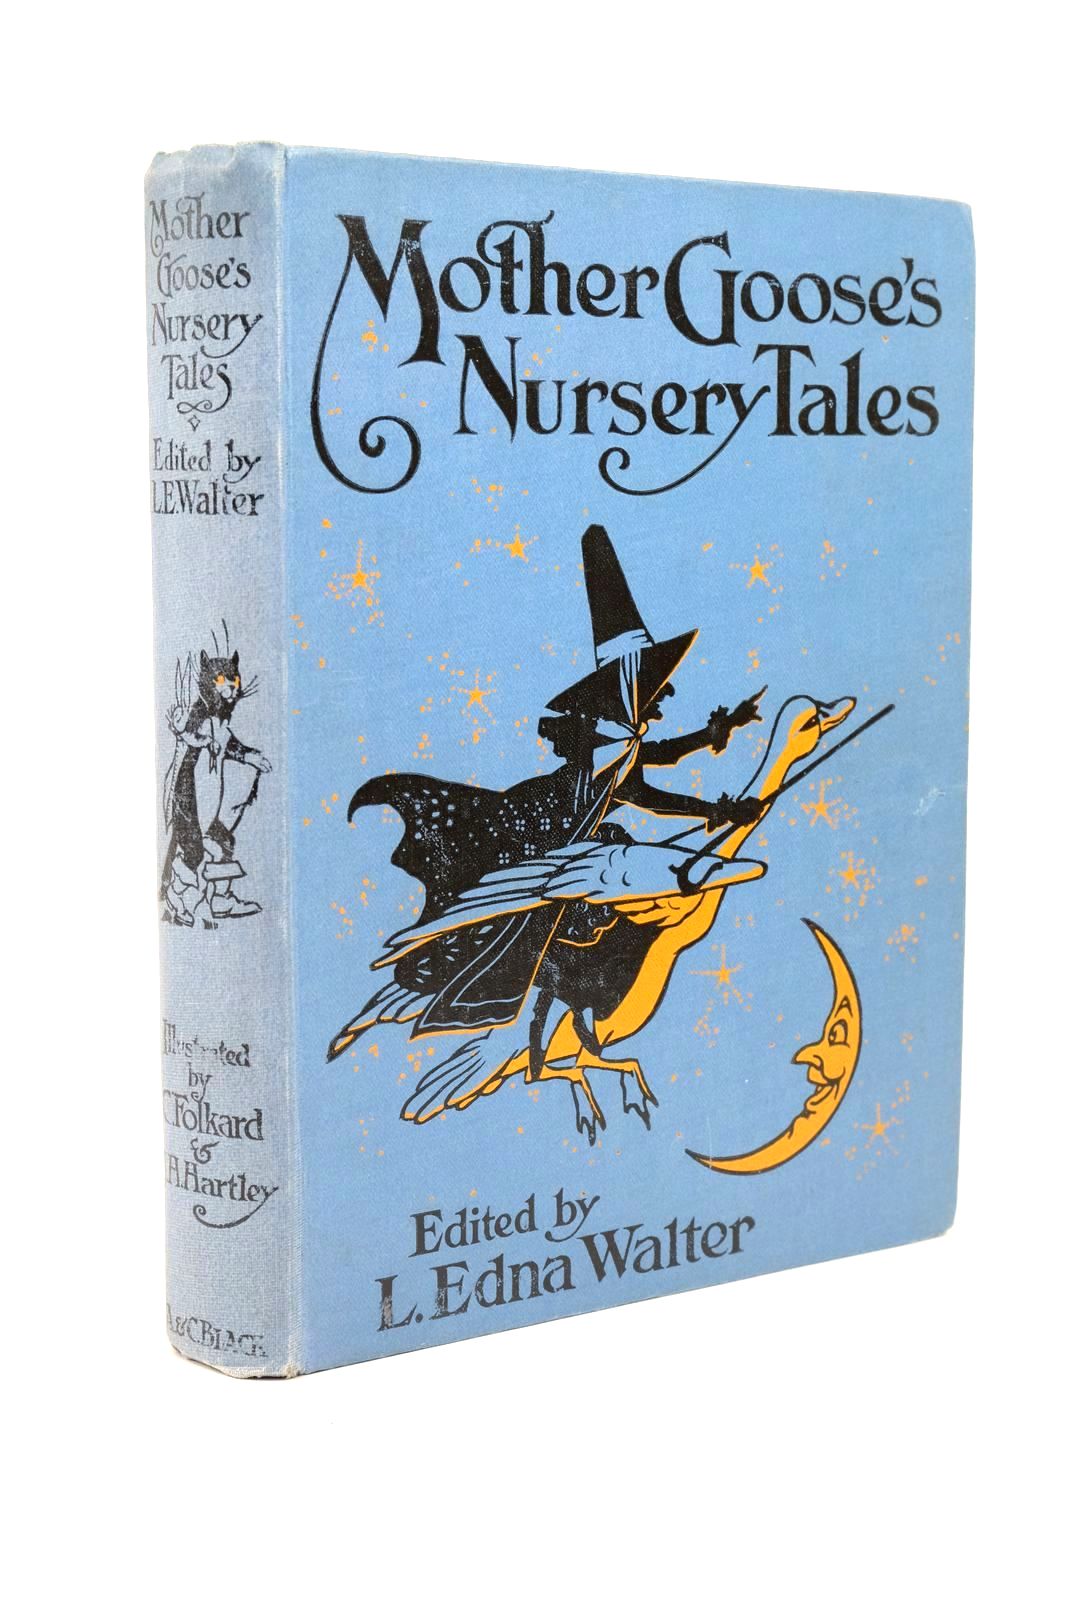 Photo of MOTHER GOOSE'S NURSERY TALES written by Walter, L. Edna illustrated by Folkard, Charles Hartley, J.H. published by A. &amp; C. Black Ltd. (STOCK CODE: 1323066)  for sale by Stella & Rose's Books